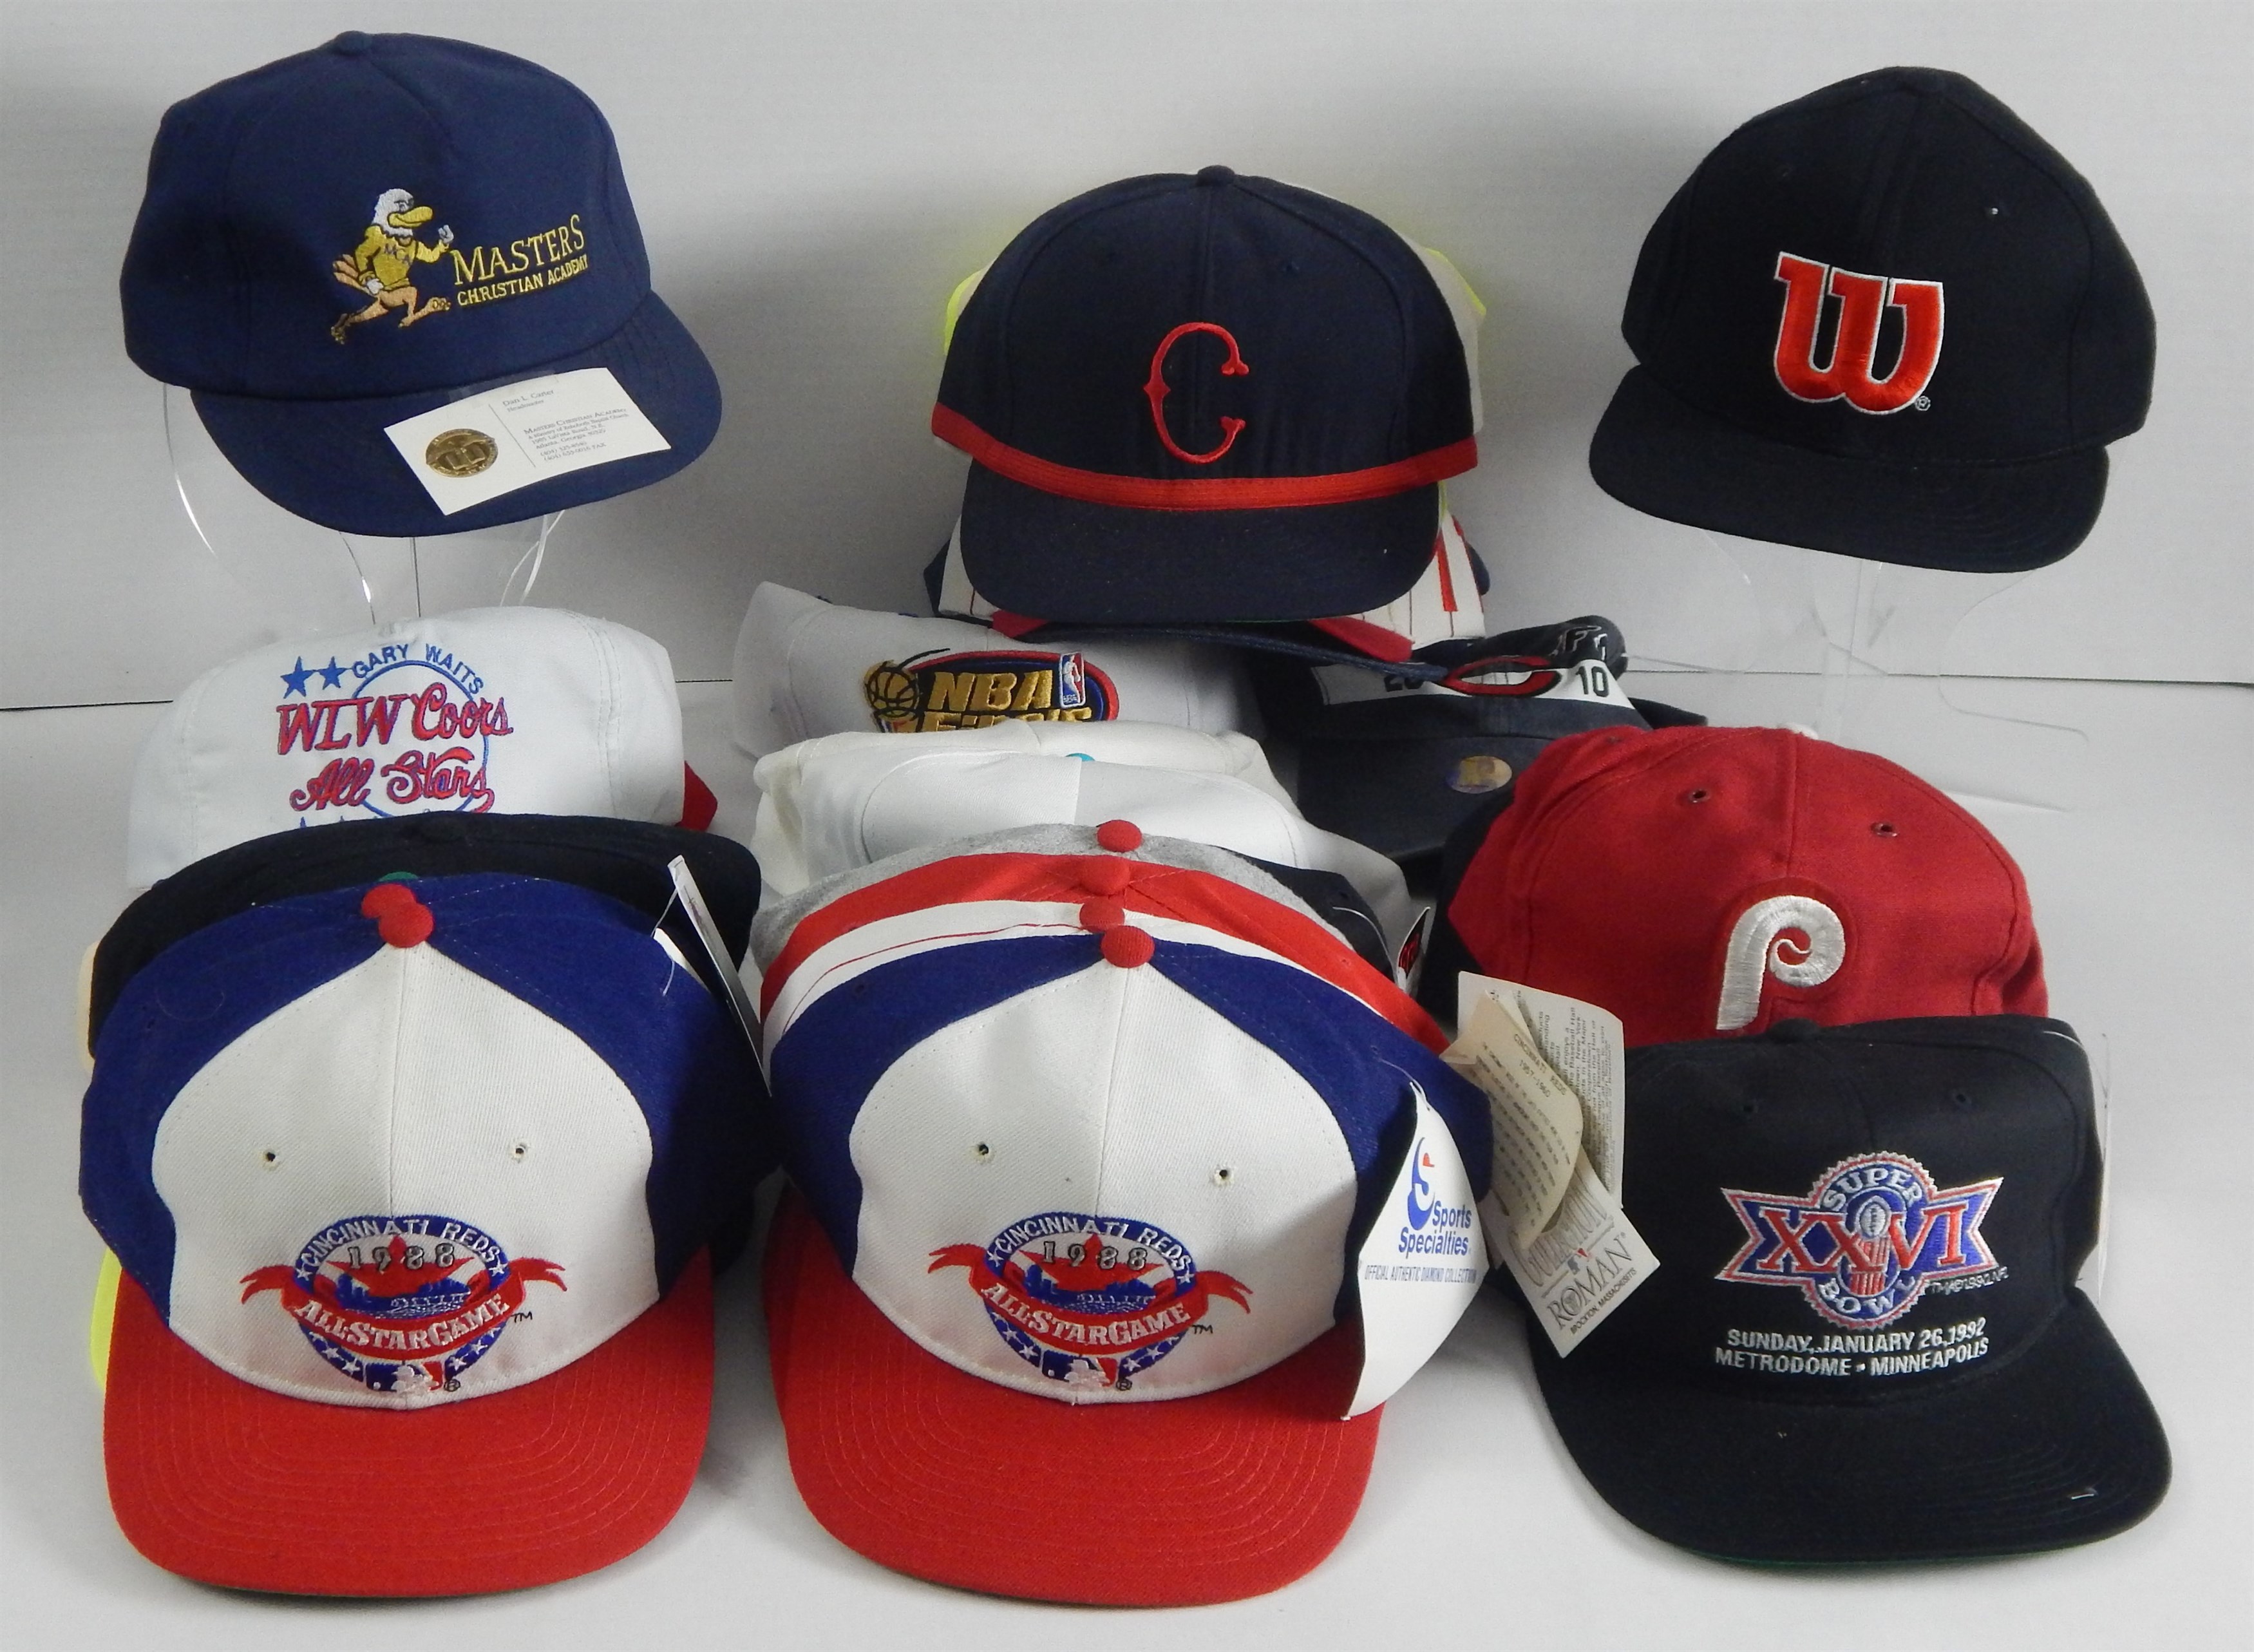 Bernie Stowe Collection of Hats (30)